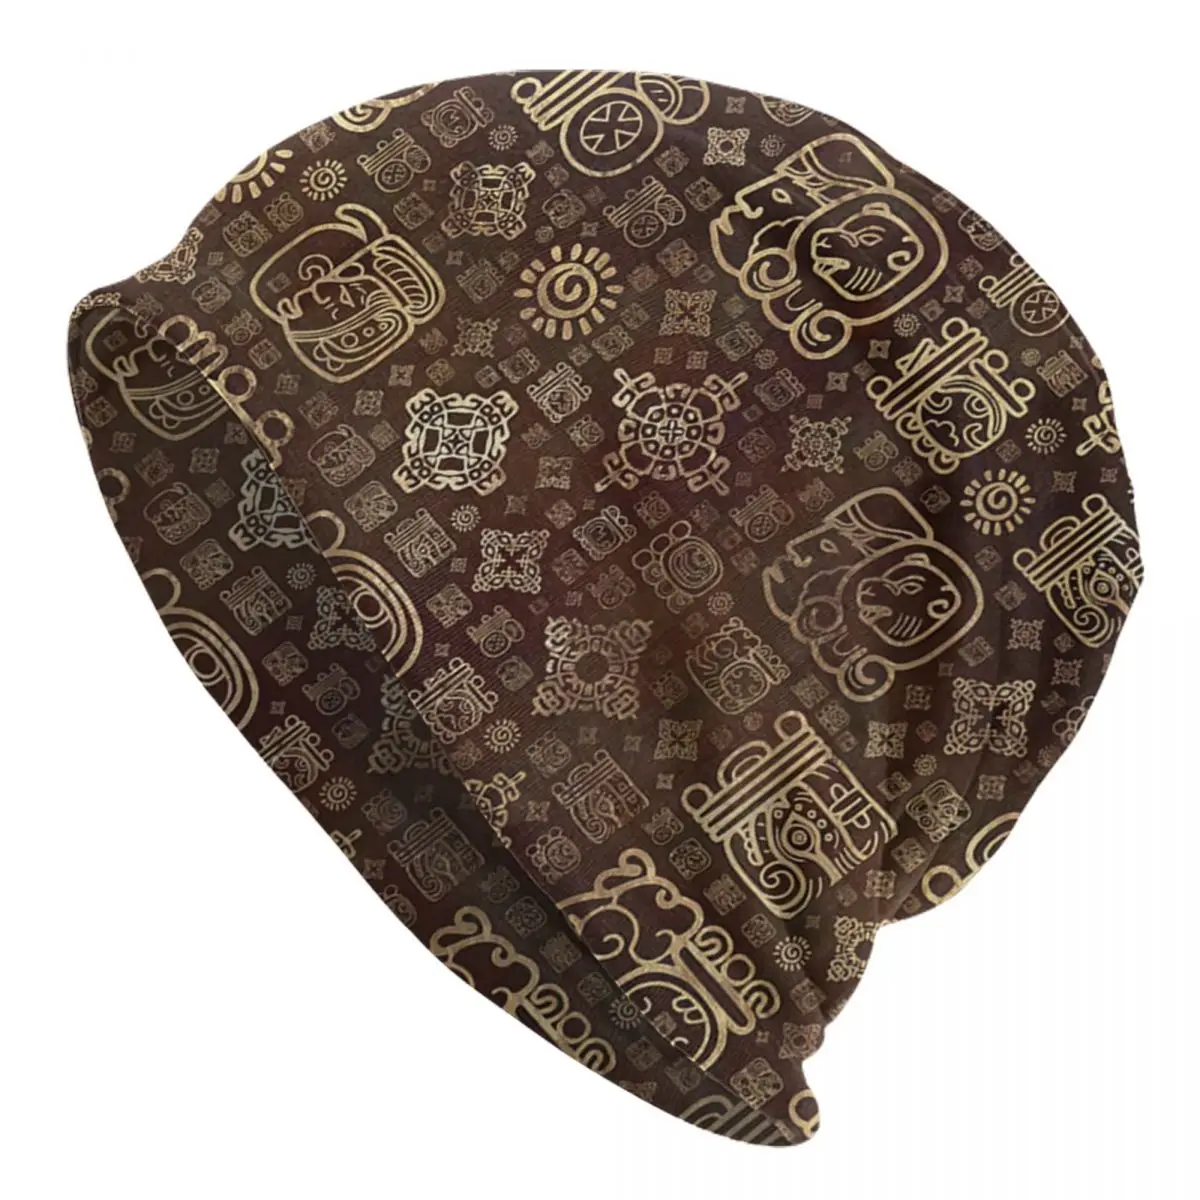 Mayan Glyphs And Ornaments Pattern Adult Men's Women's Knit Hat Keep warm winter knitted hat